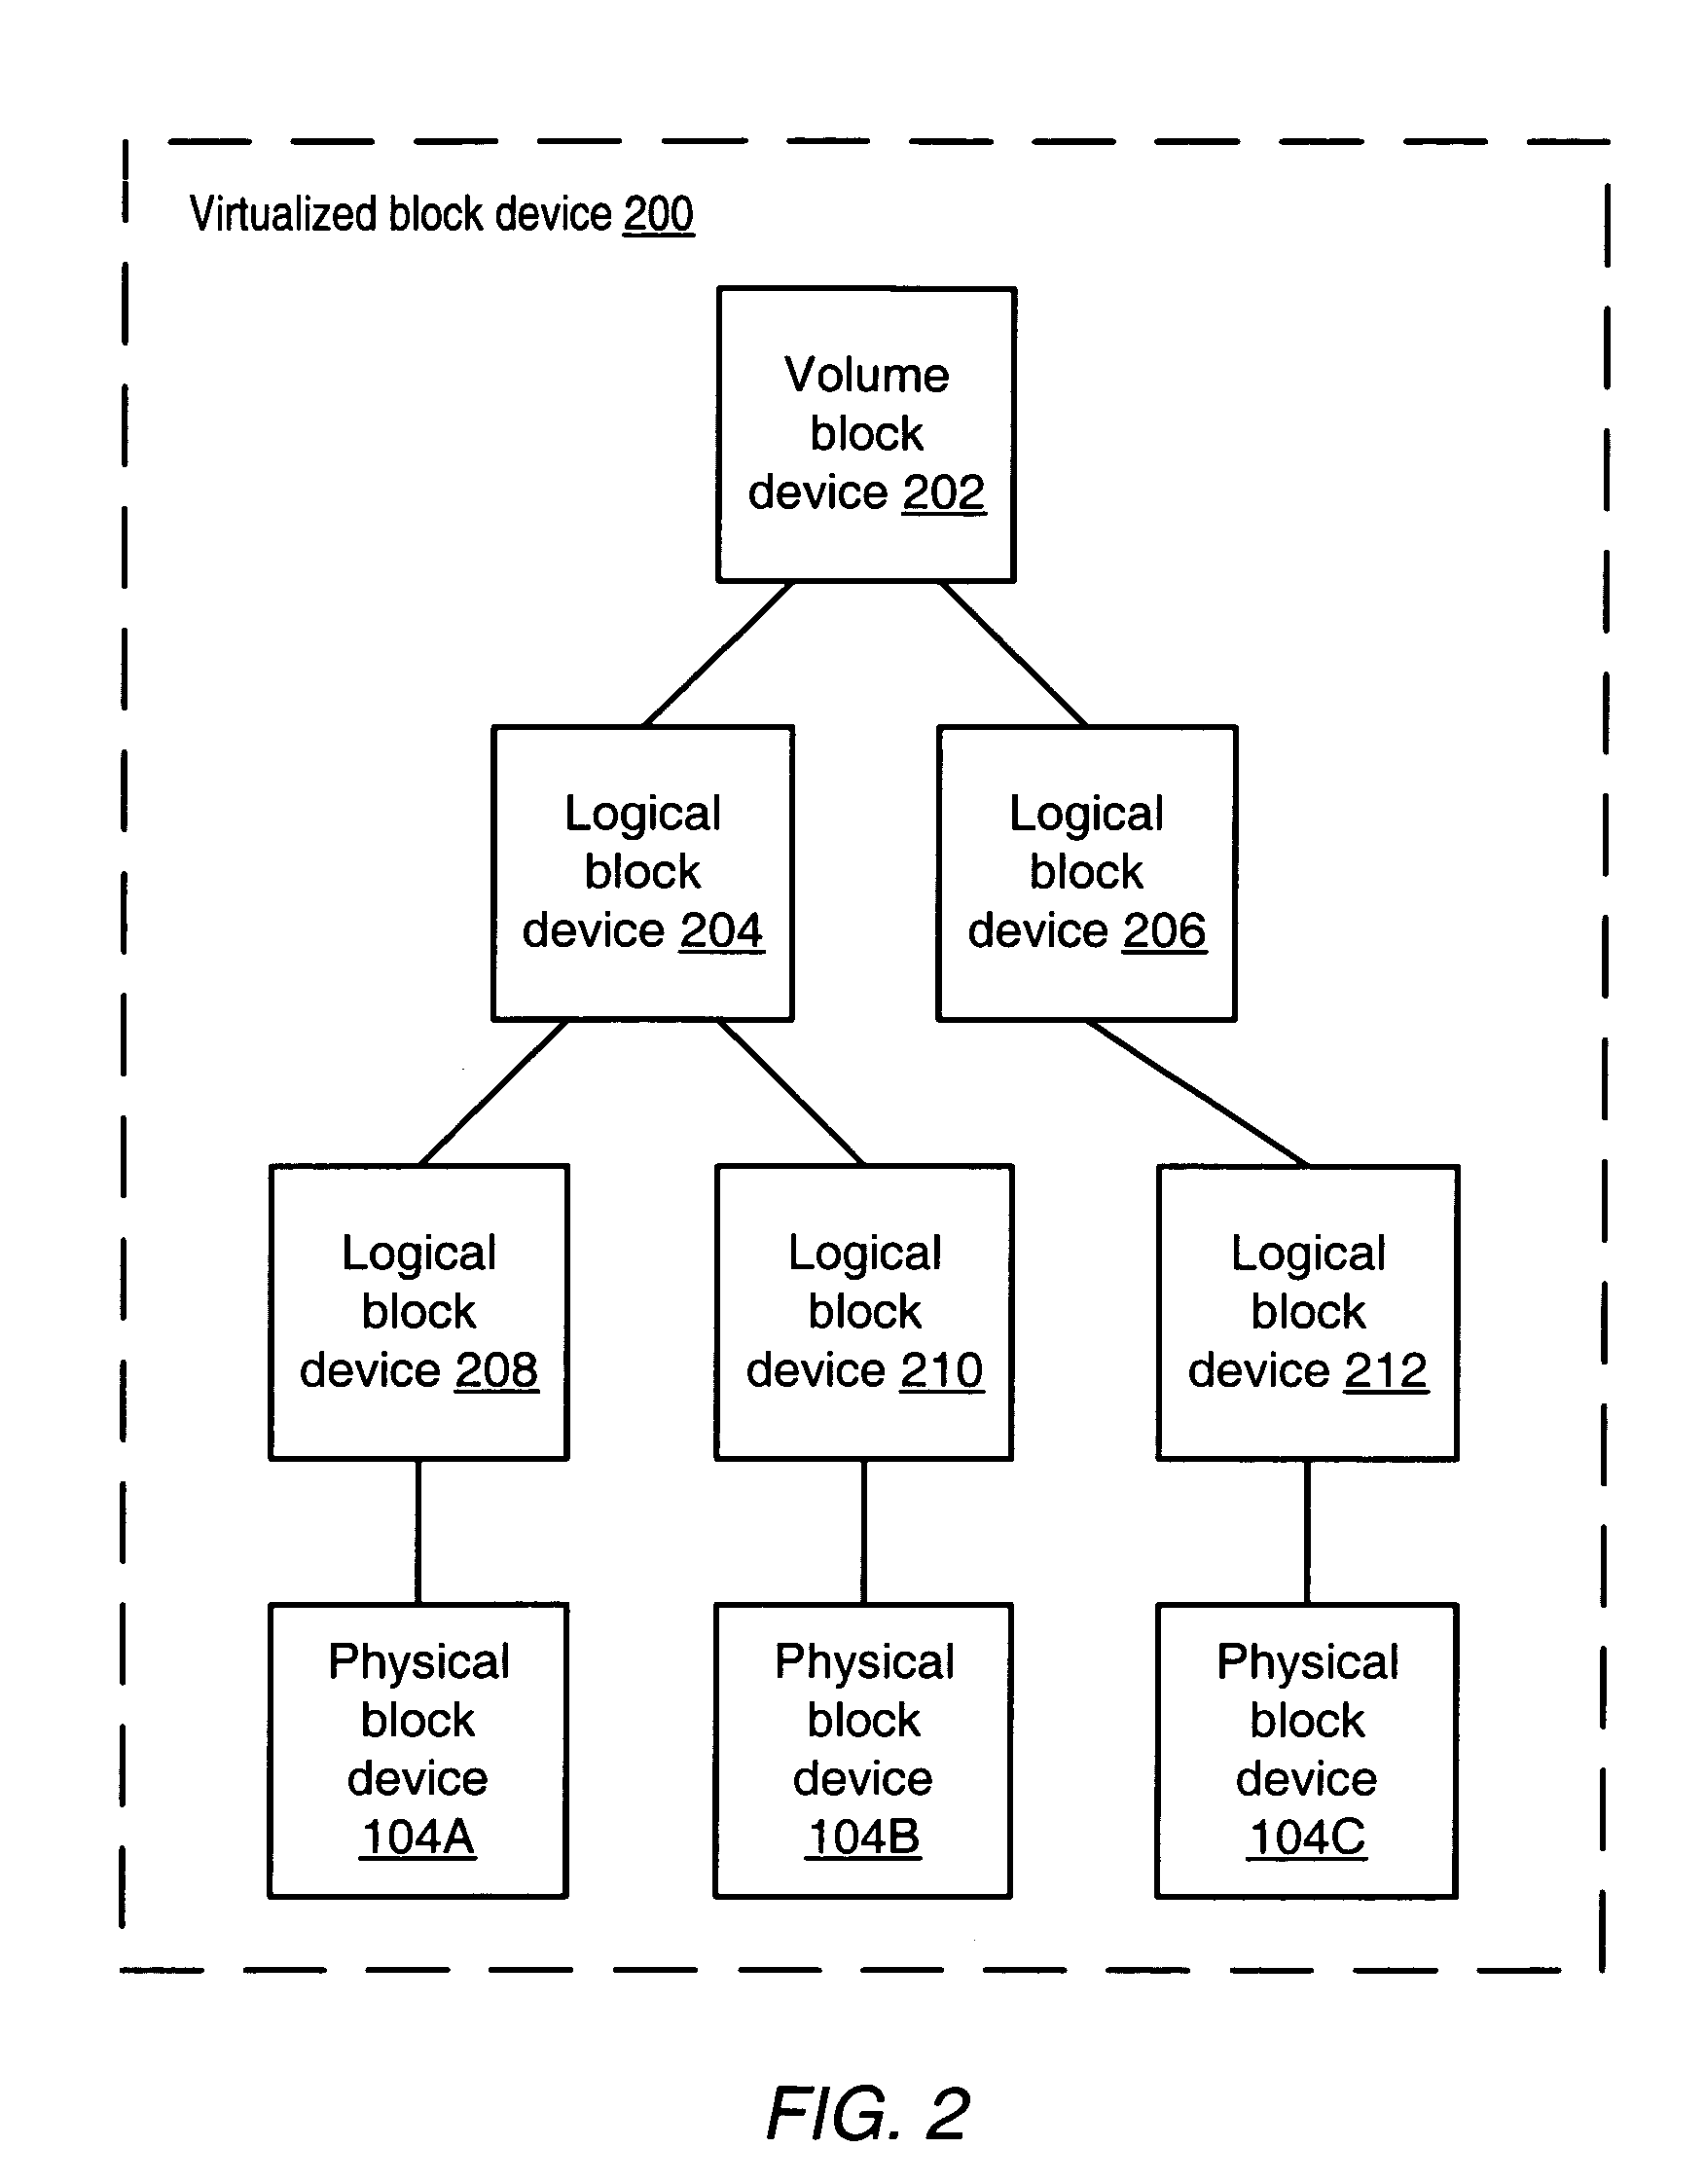 System and method for recoverable mirroring in a storage environment employing asymmetric distributed block virtualization